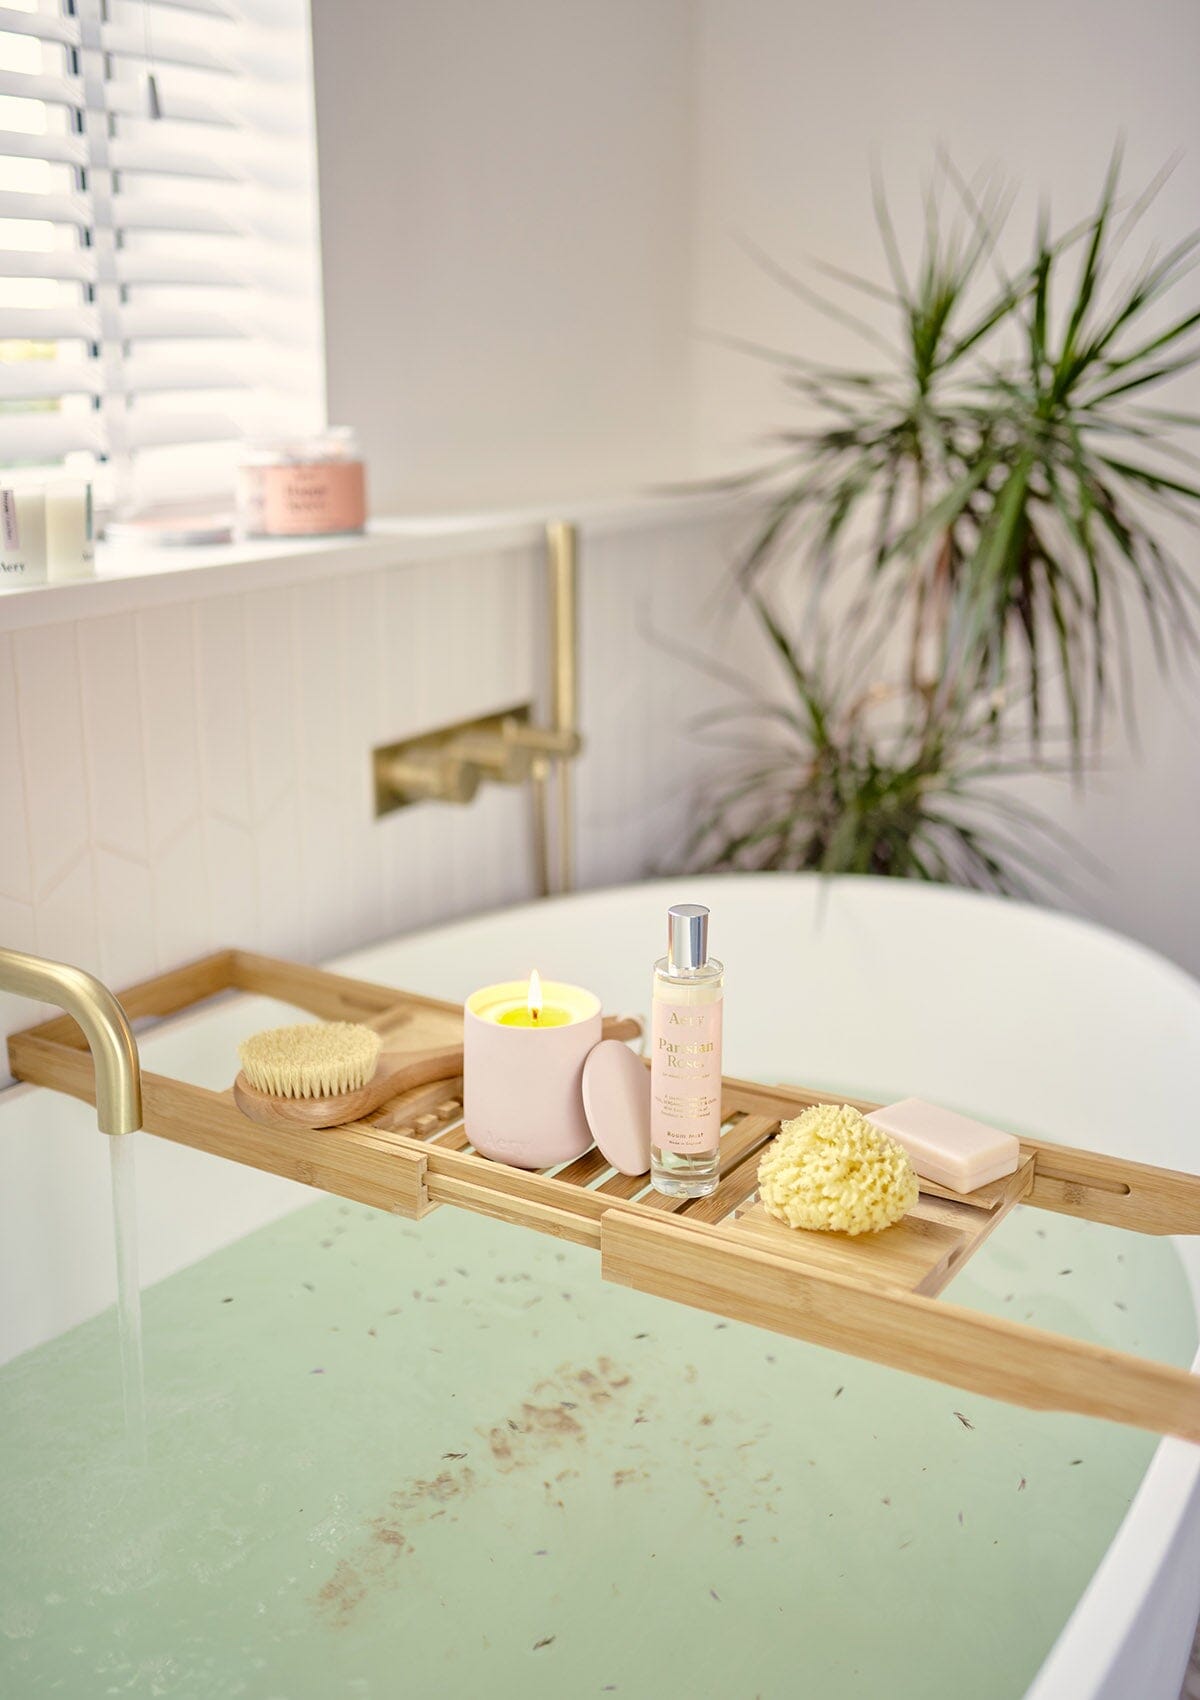 Pale Pink Parisian Rose room mist by Aery displayed next to Parisian Rose candle on wooden bath tray in bathroom 